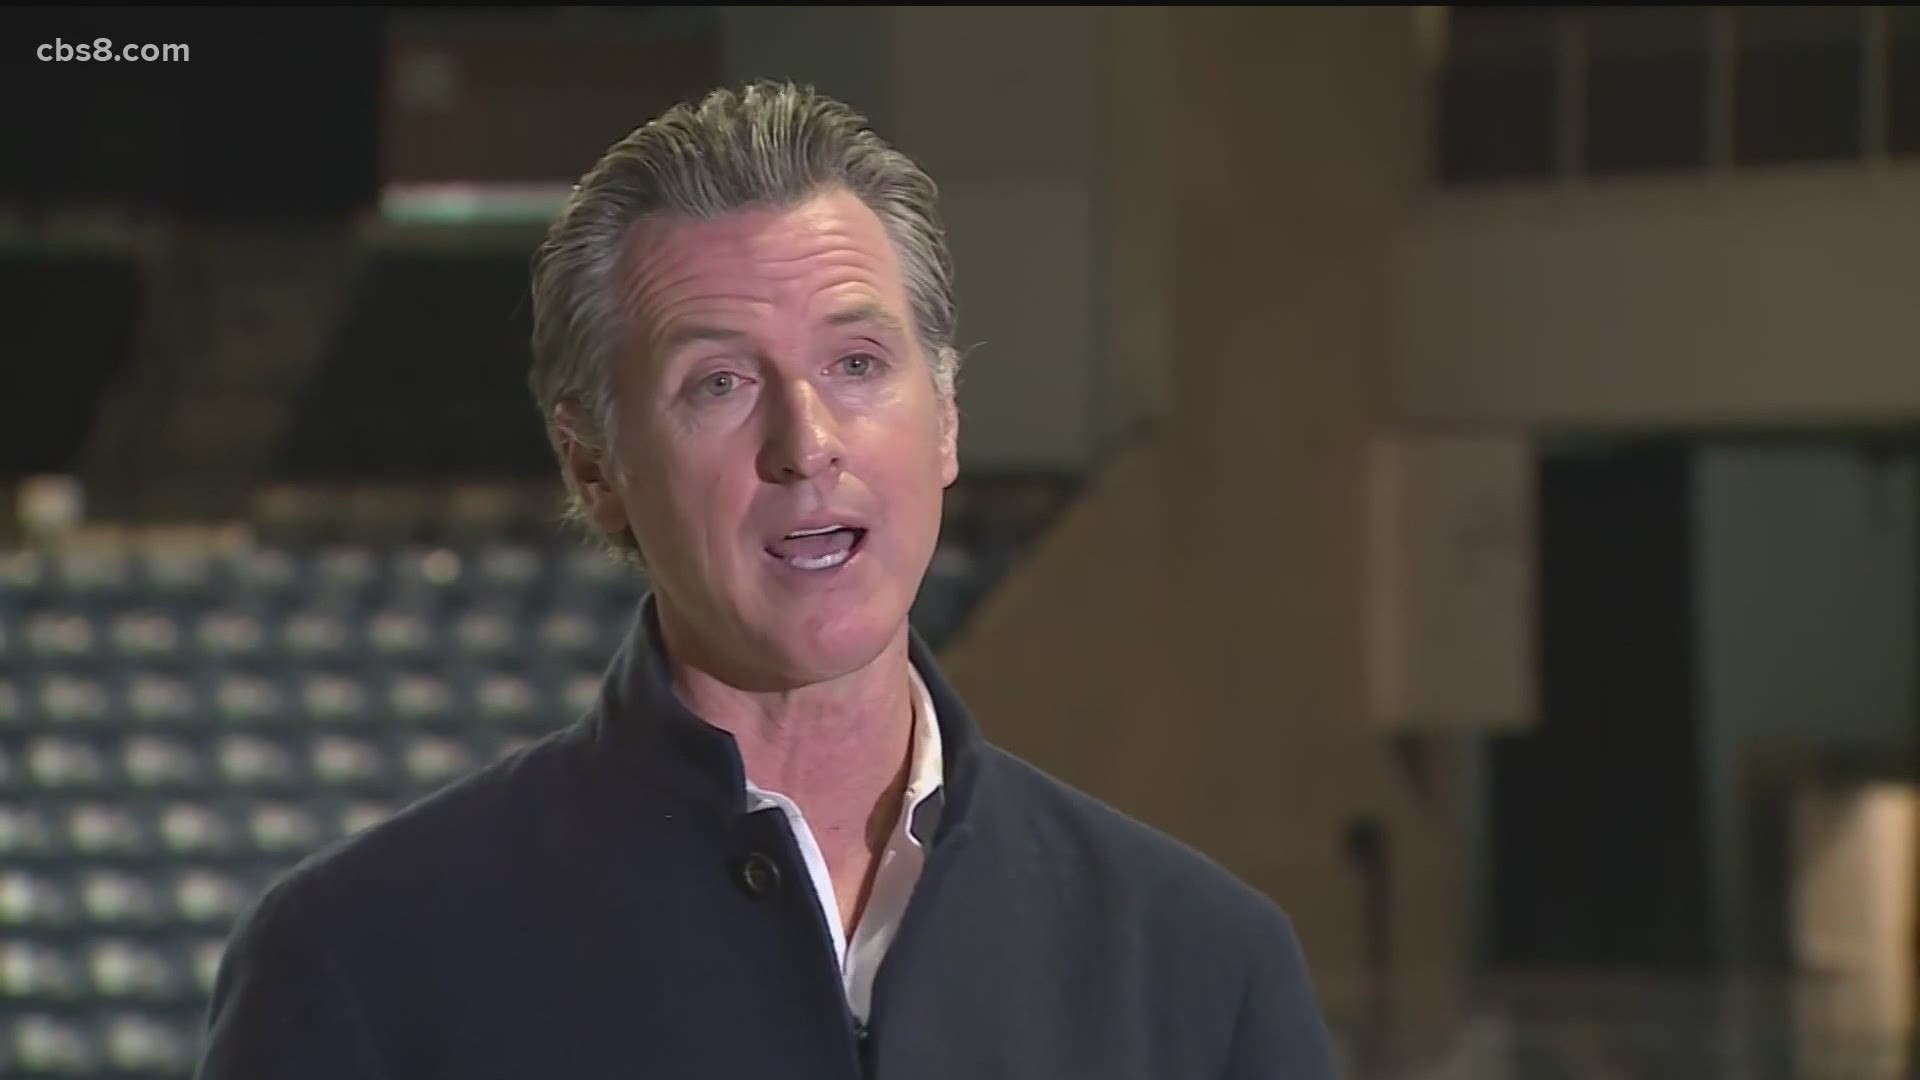 In this update we cover the resumption of the J & J vaccine in San Diego, the recall of Governor Newsom hits a major milestone and your weekday weather.